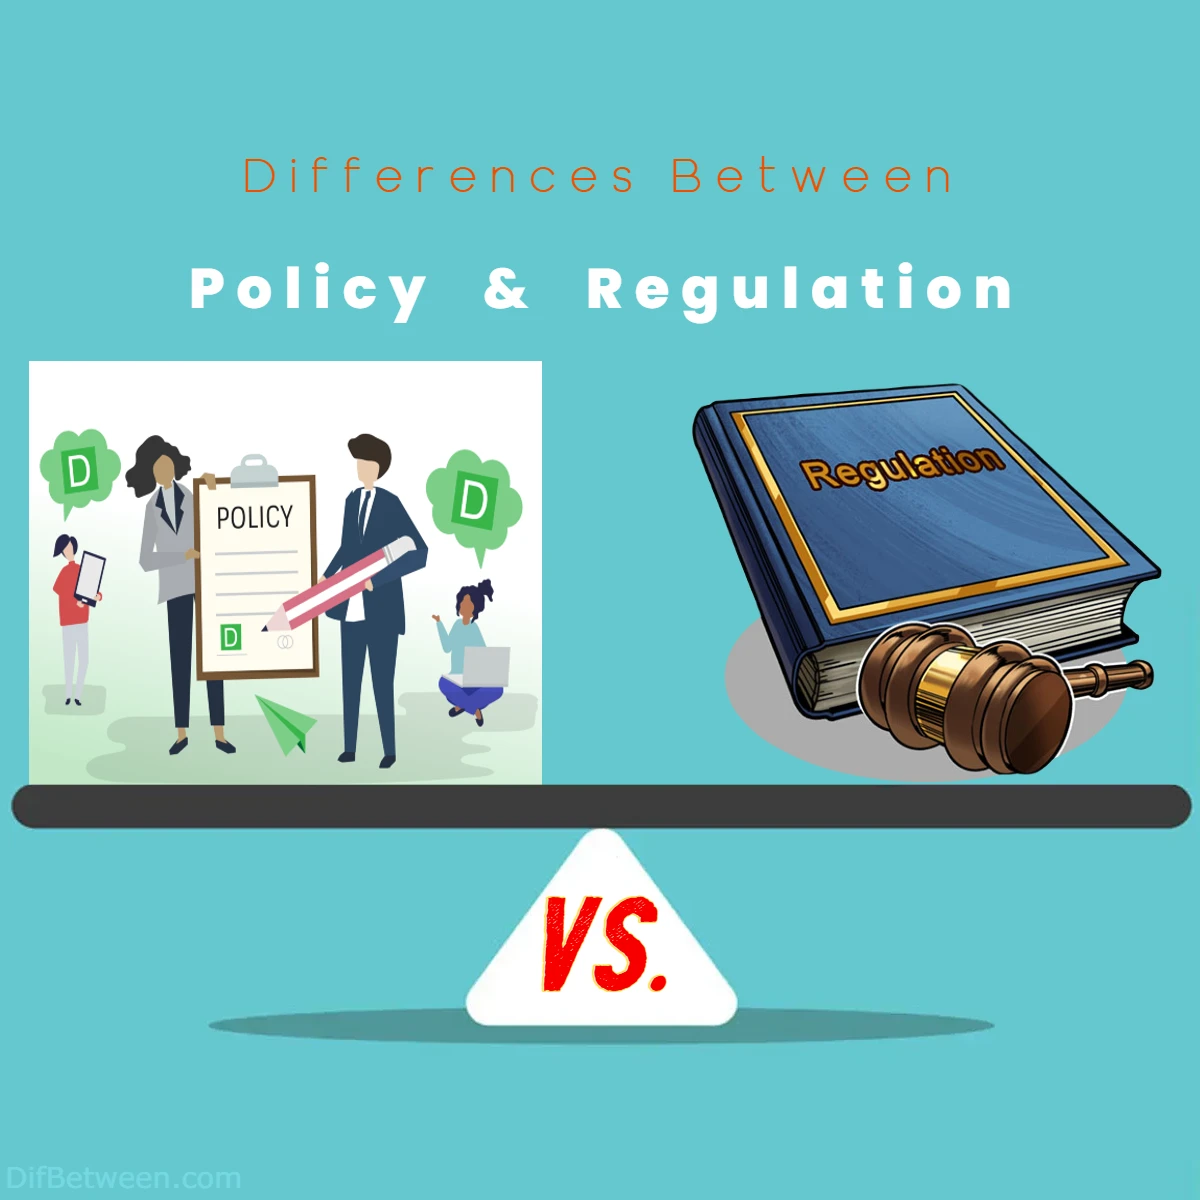 Differences Between Policy vs Regulation